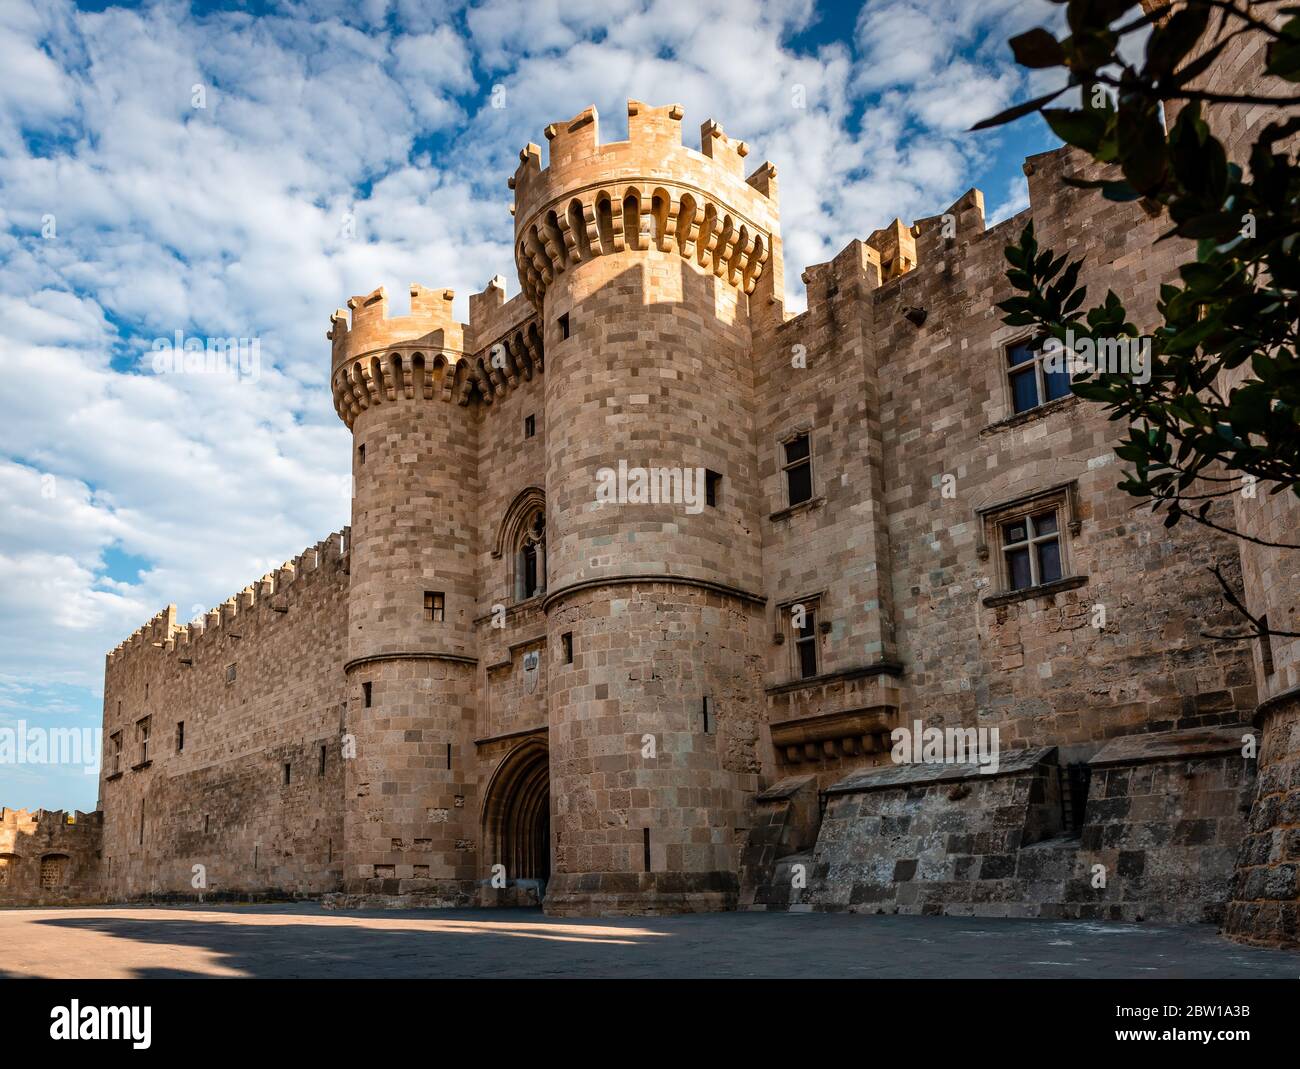 Palace of the Knights at Rhodes island, Greece Stock Photo by